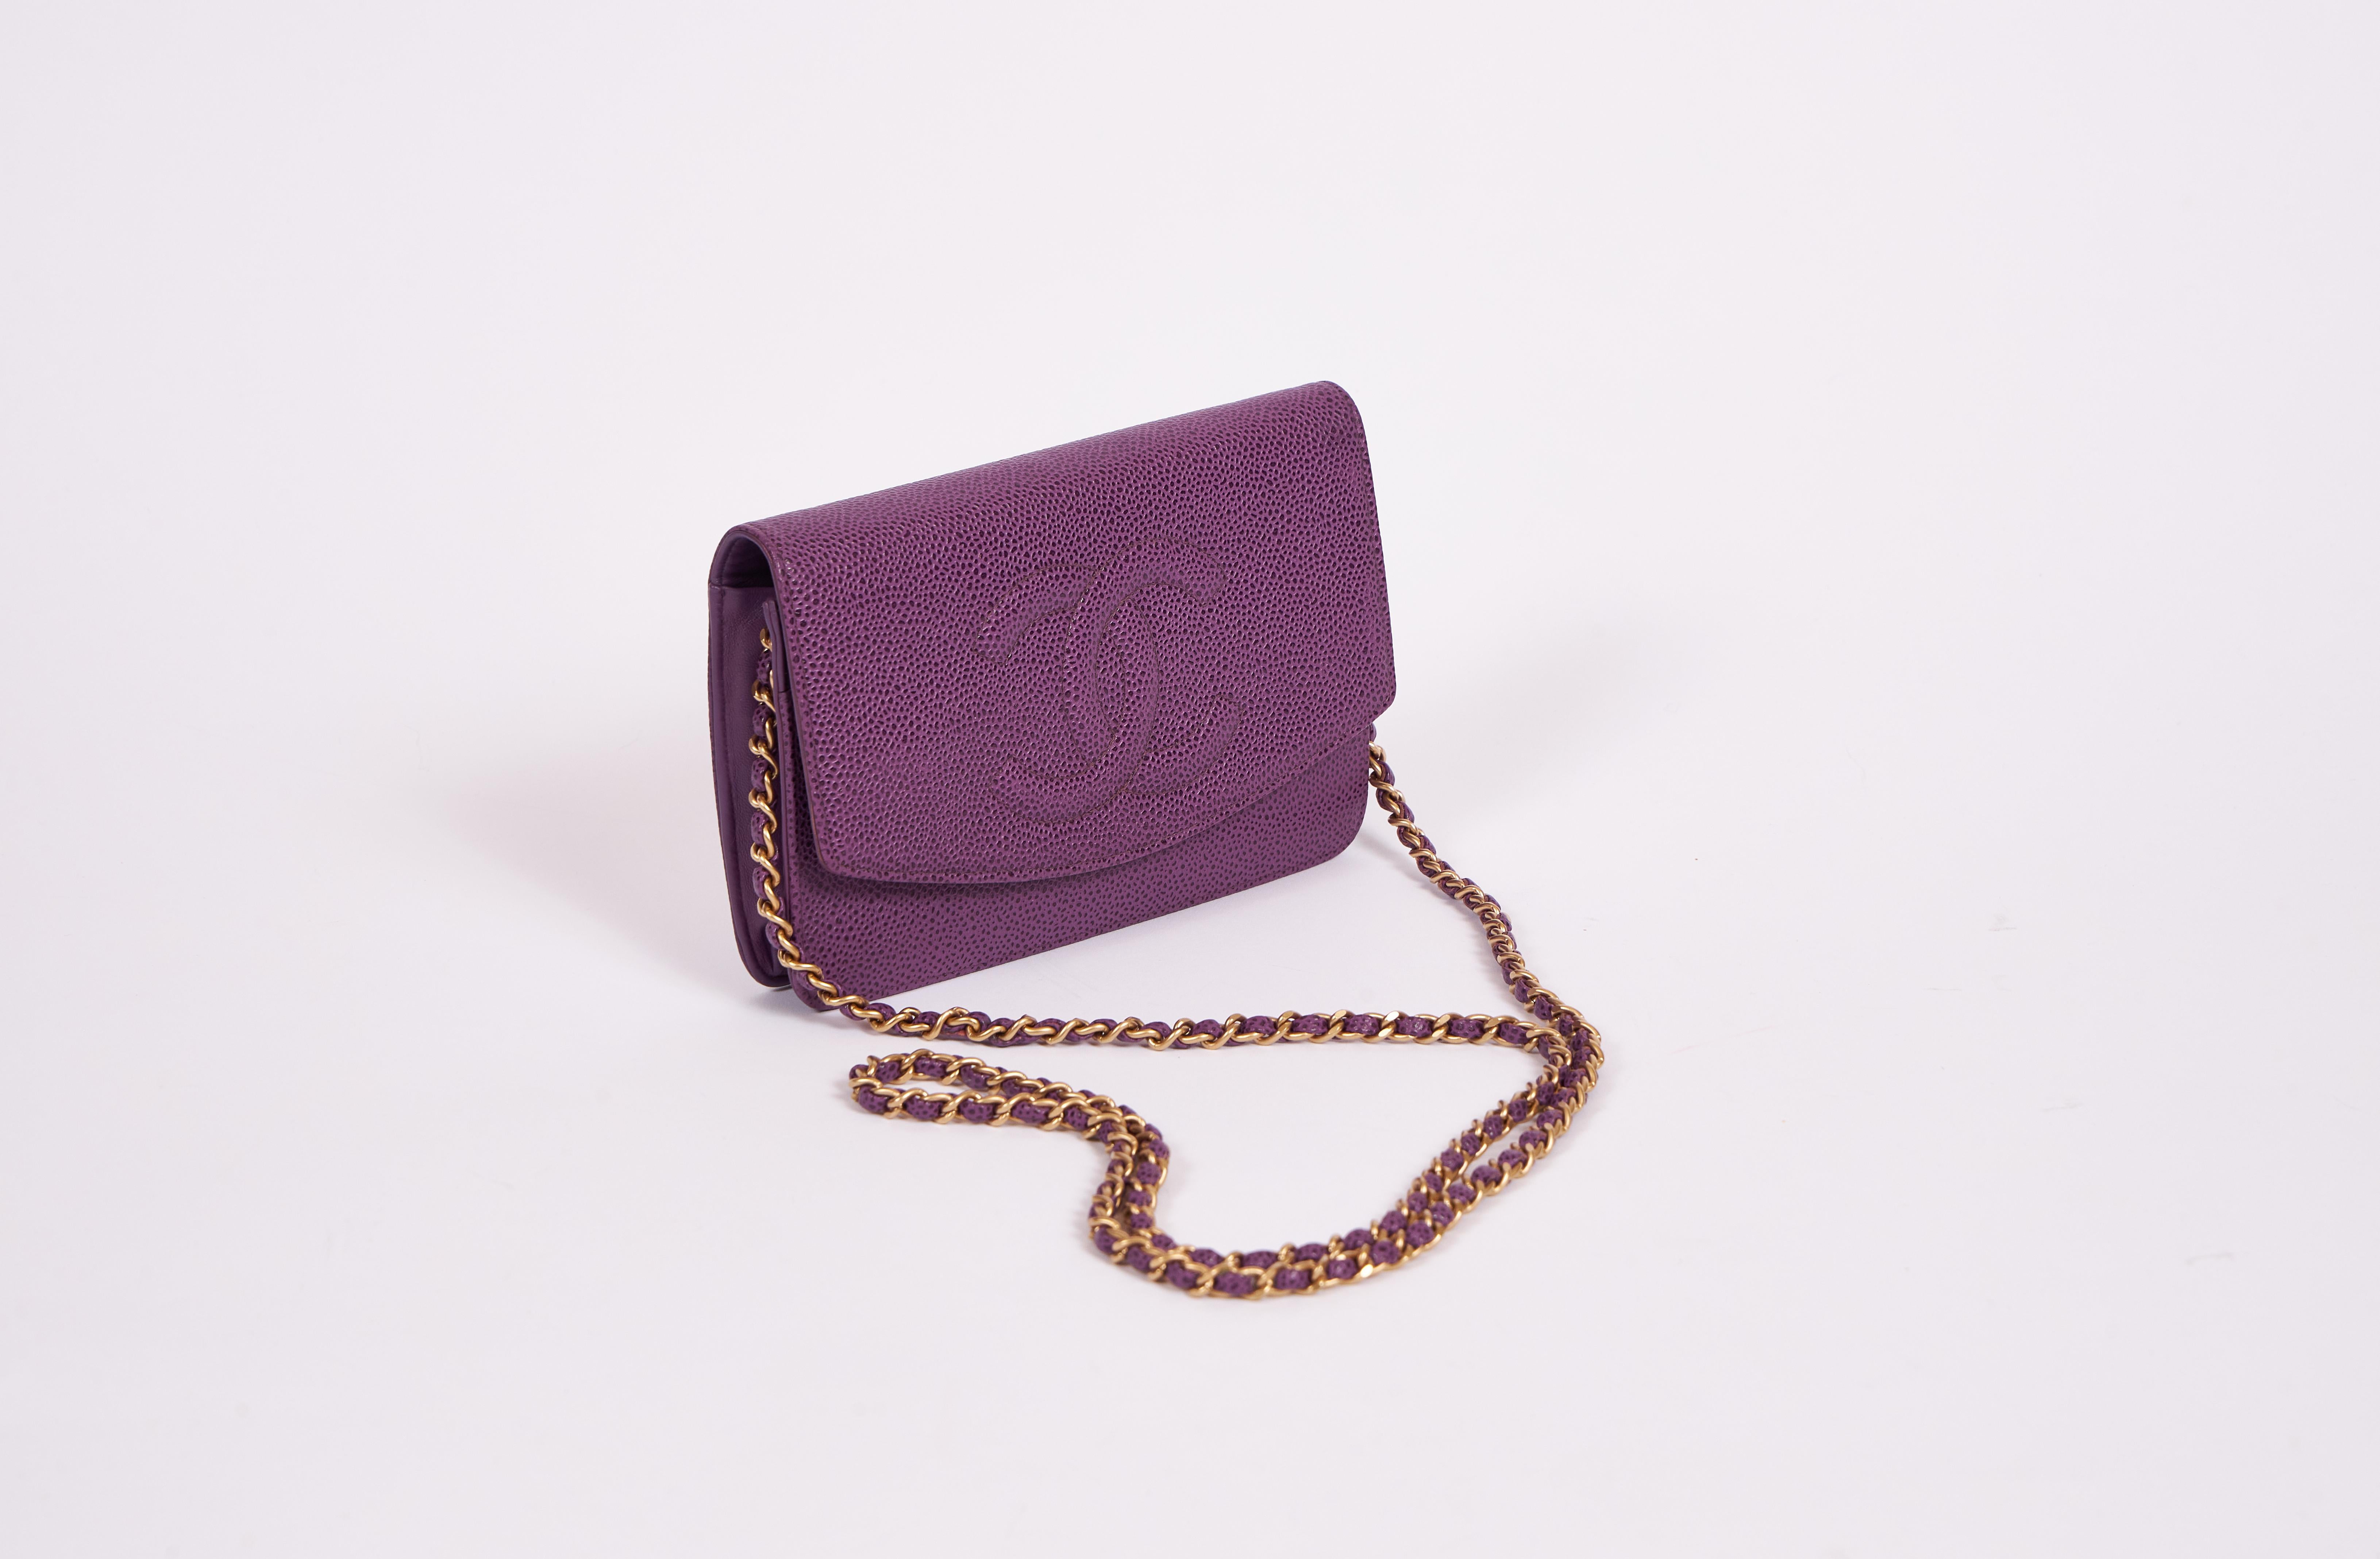 Chanel purple caviar leather cross-body wallet on a chain. Gold tone hardware. Comes with hologram and original dust cover. Minor inside wear.